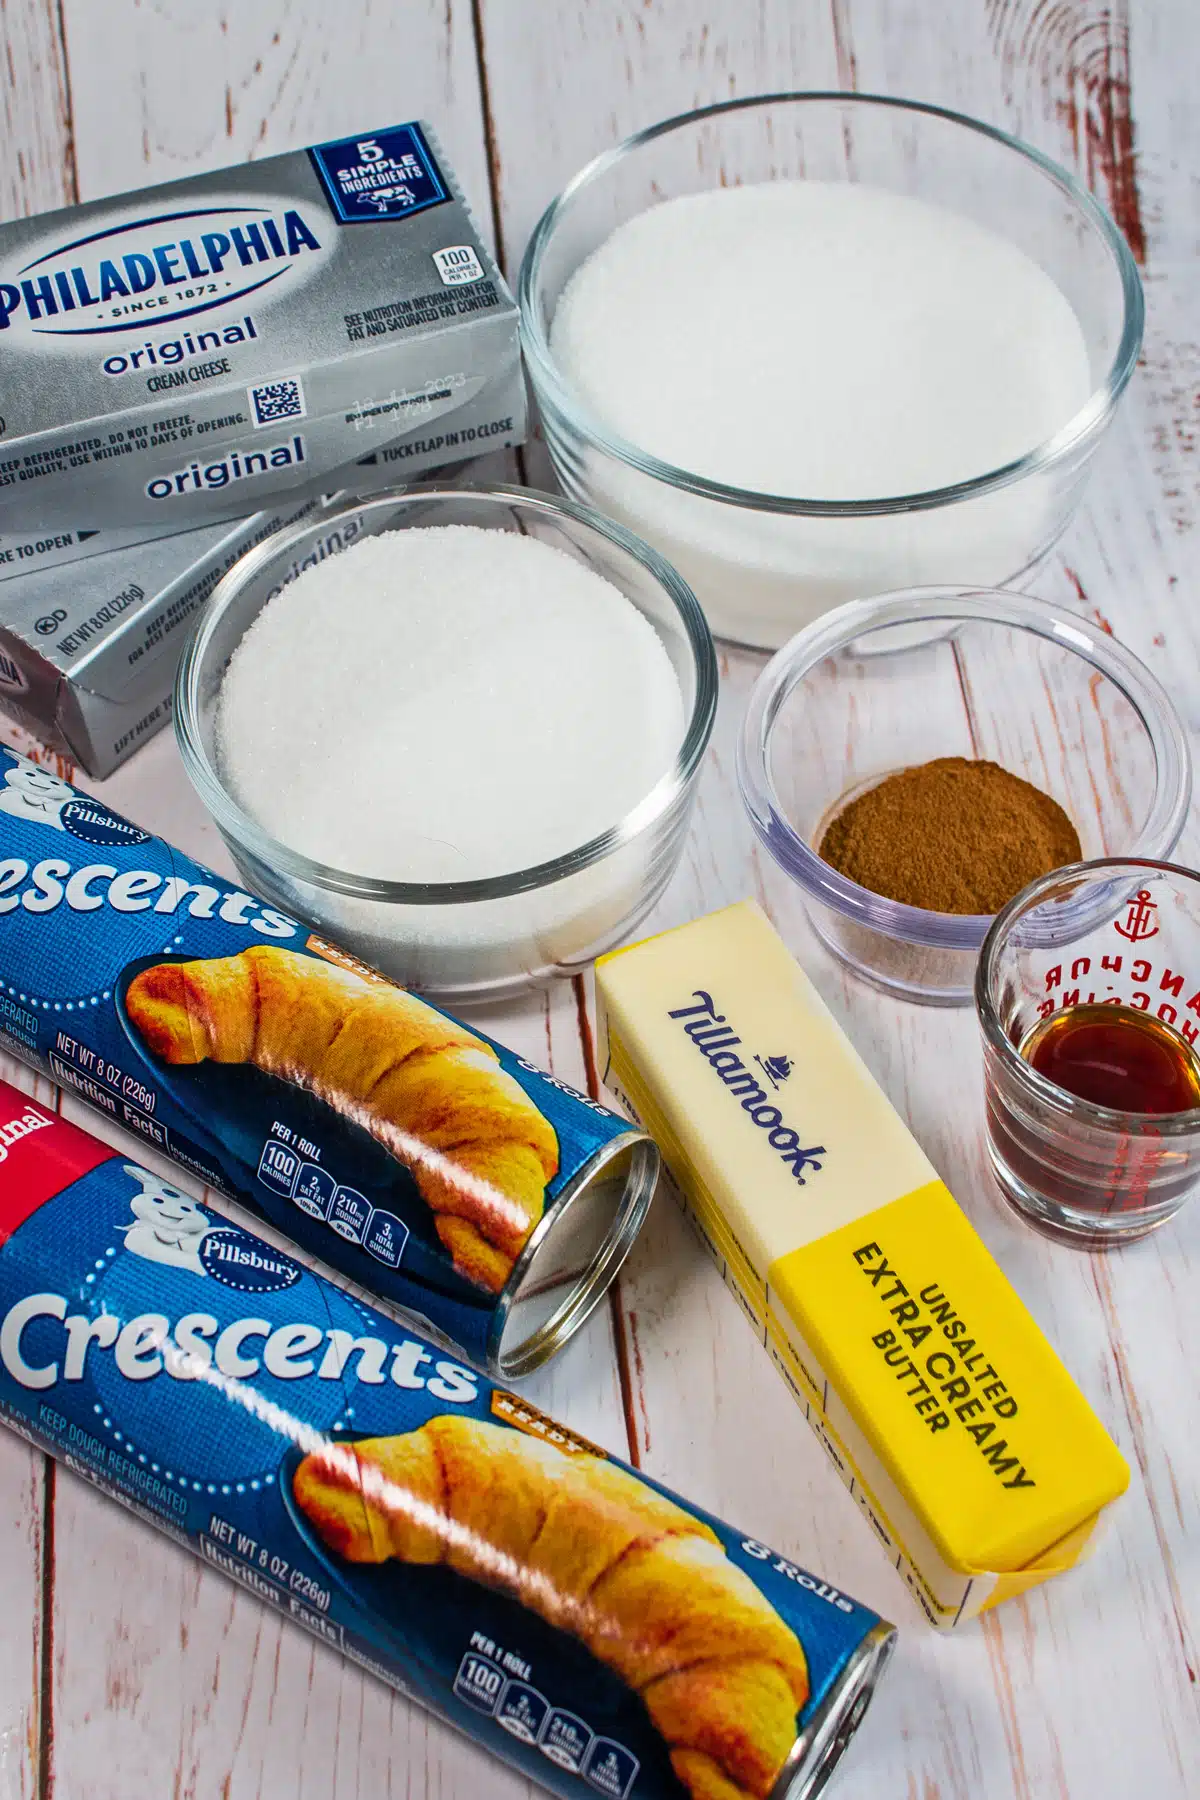 Sopapilla cheesecake bars ingredients measured out and ready to combine then assemble and bake.